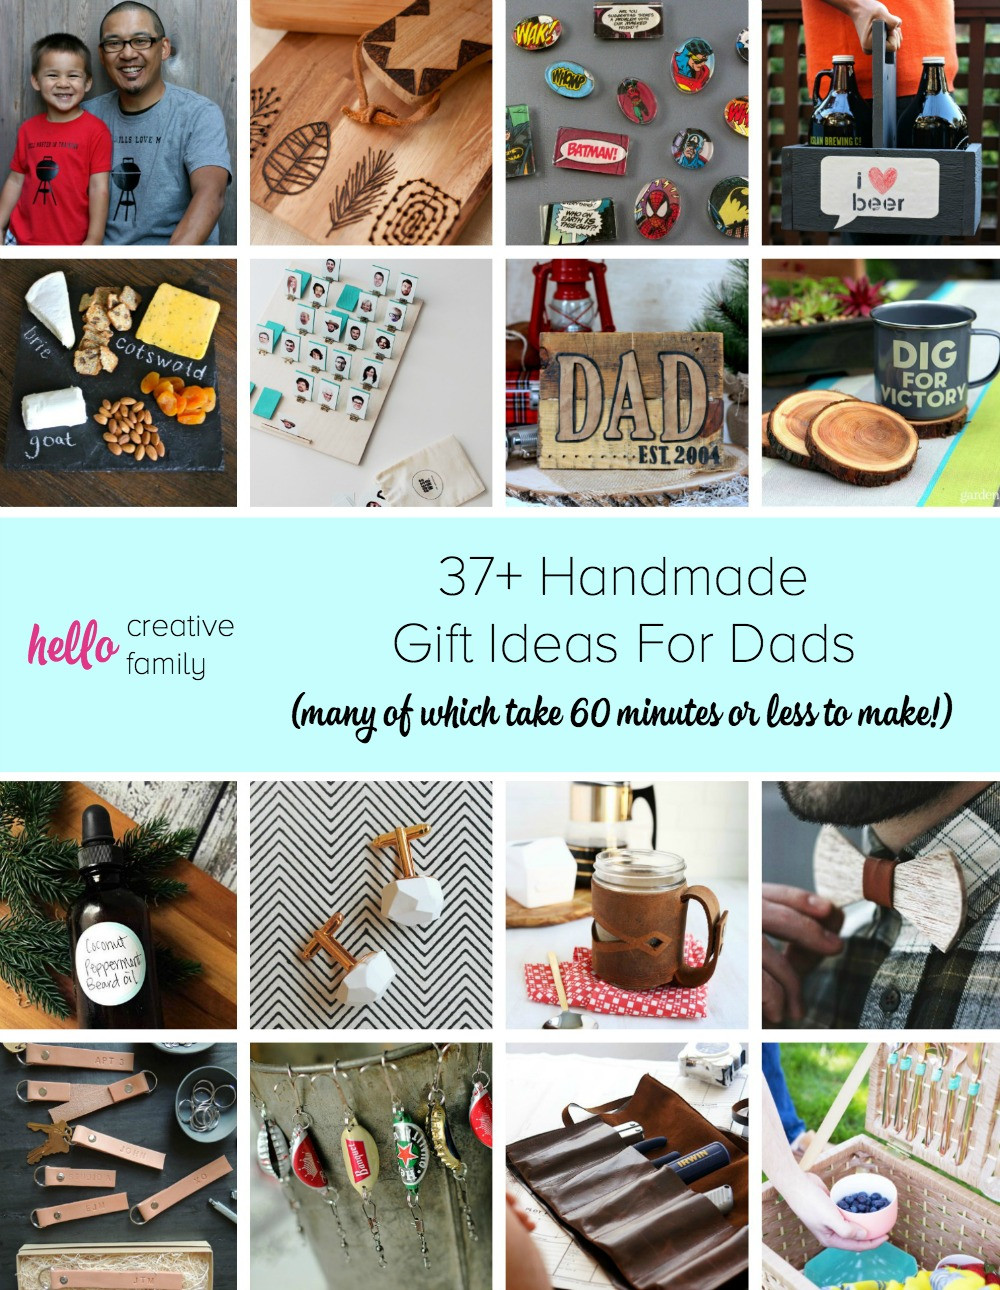 DIY Christmas Presents For Dad
 37 Handmade Gift Ideas For Dads many of which take 60